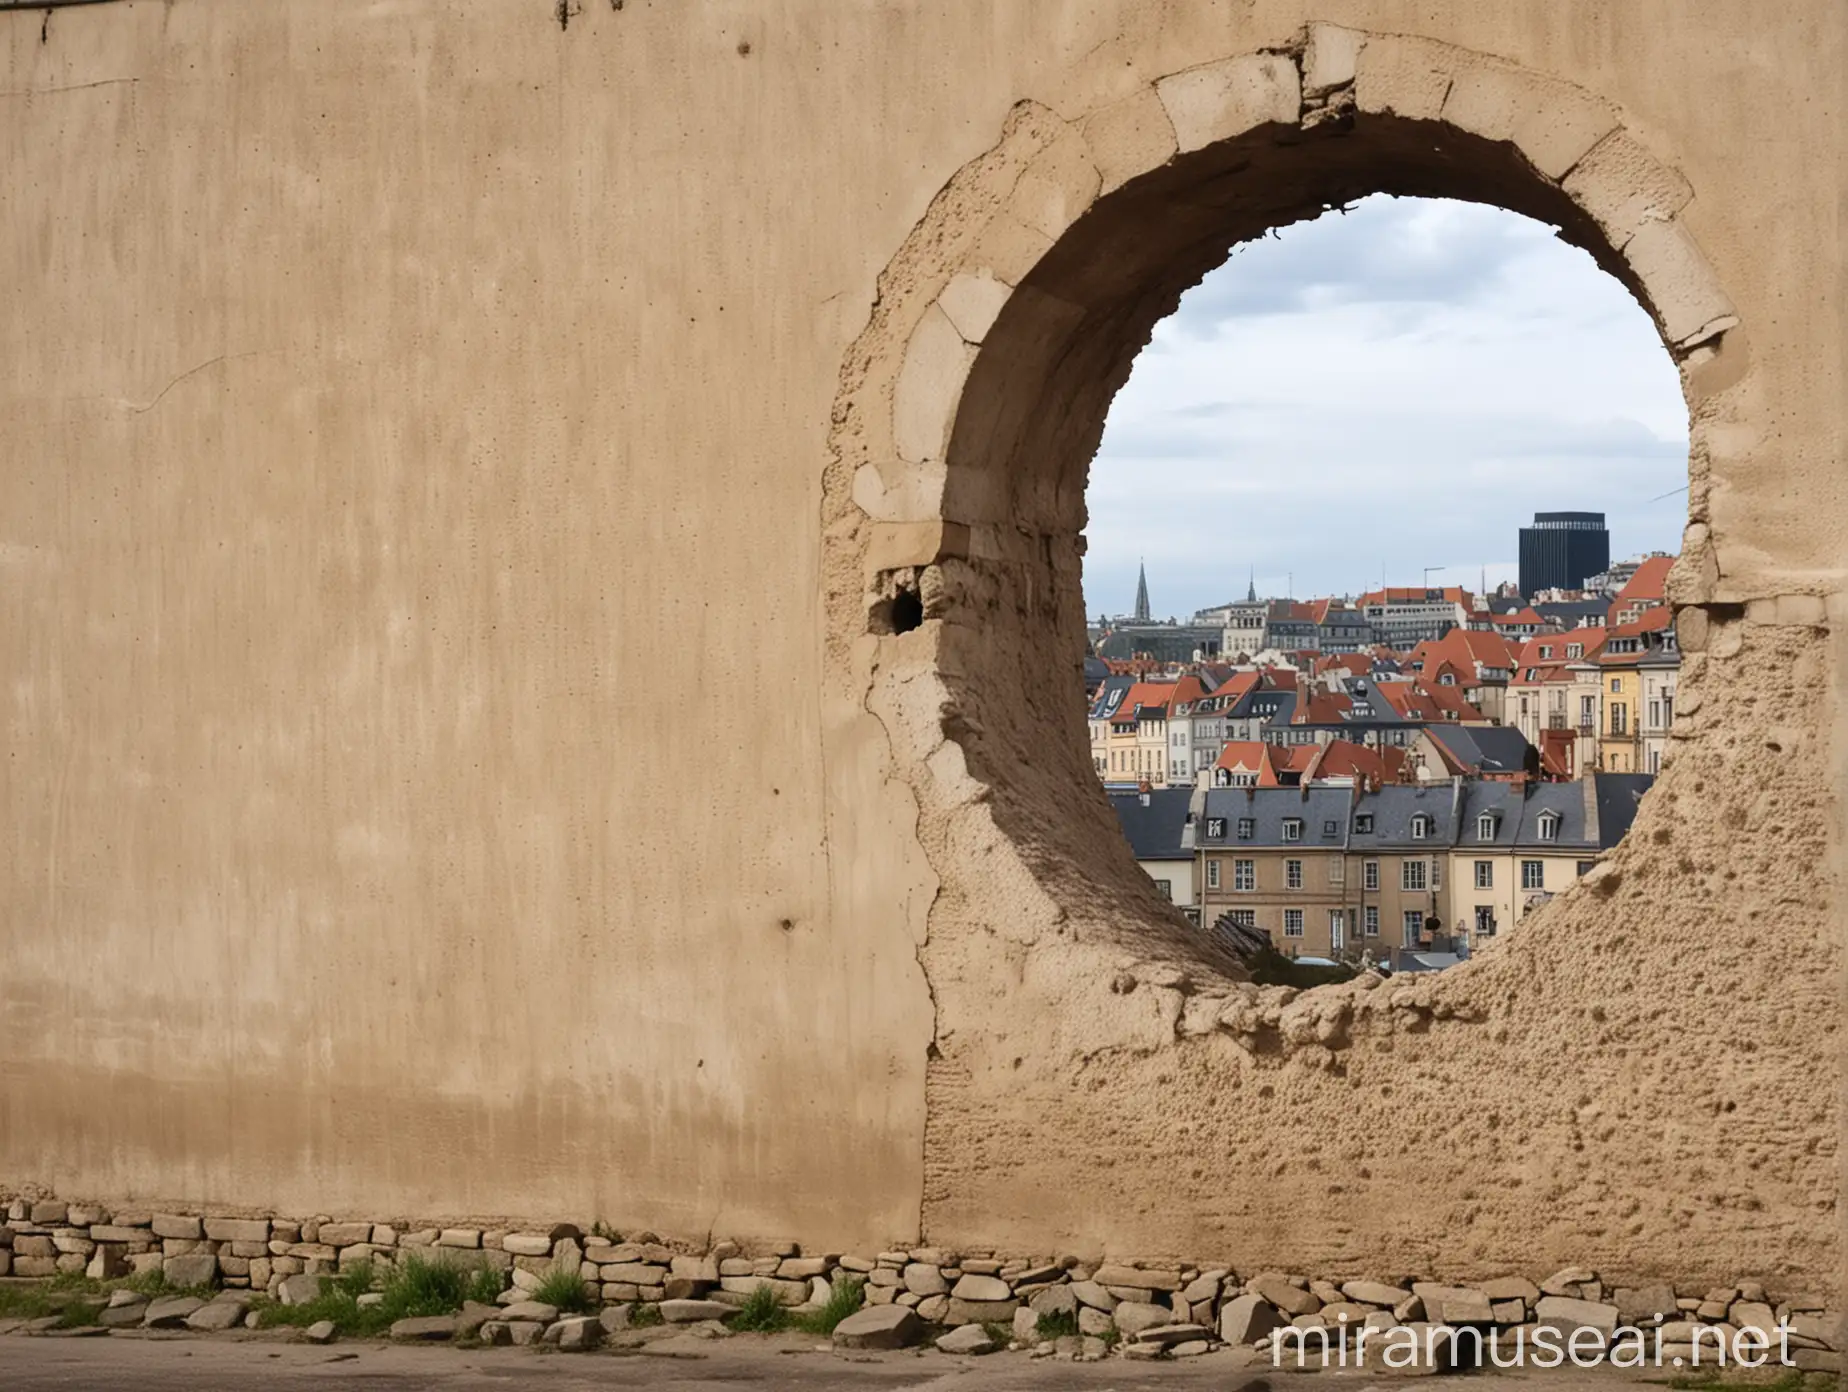 TROTOIR IN THE CITY WITH HOLE IN THE WALL